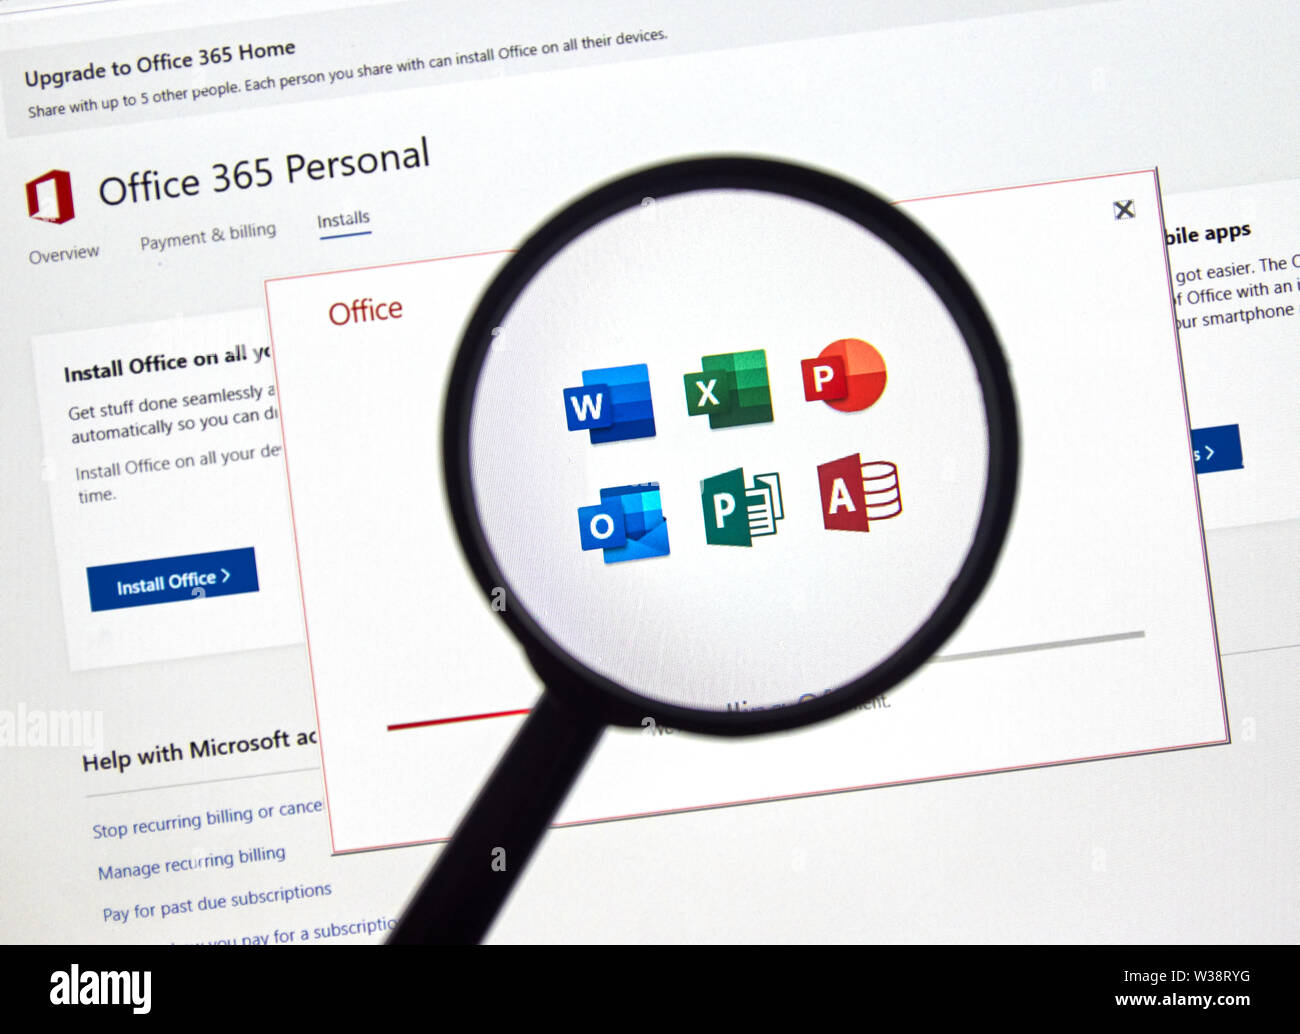 MIcrosoft 365 Icons And Other Office Applications On A Web, 56% OFF